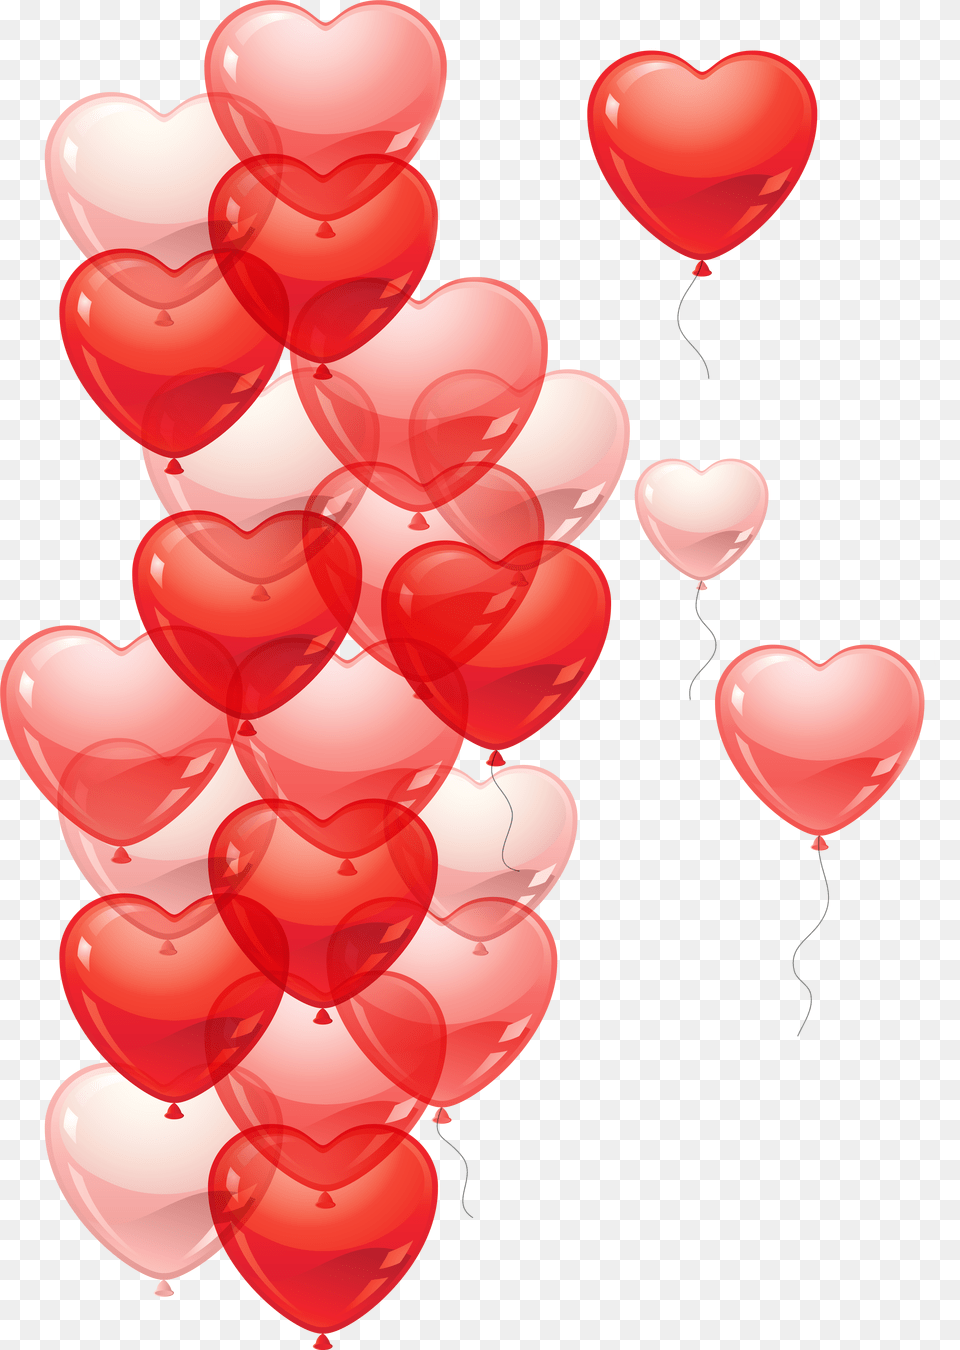 Freeuse Stock Heart Bubbles Clipart Format Hearts, Balloon Png Image